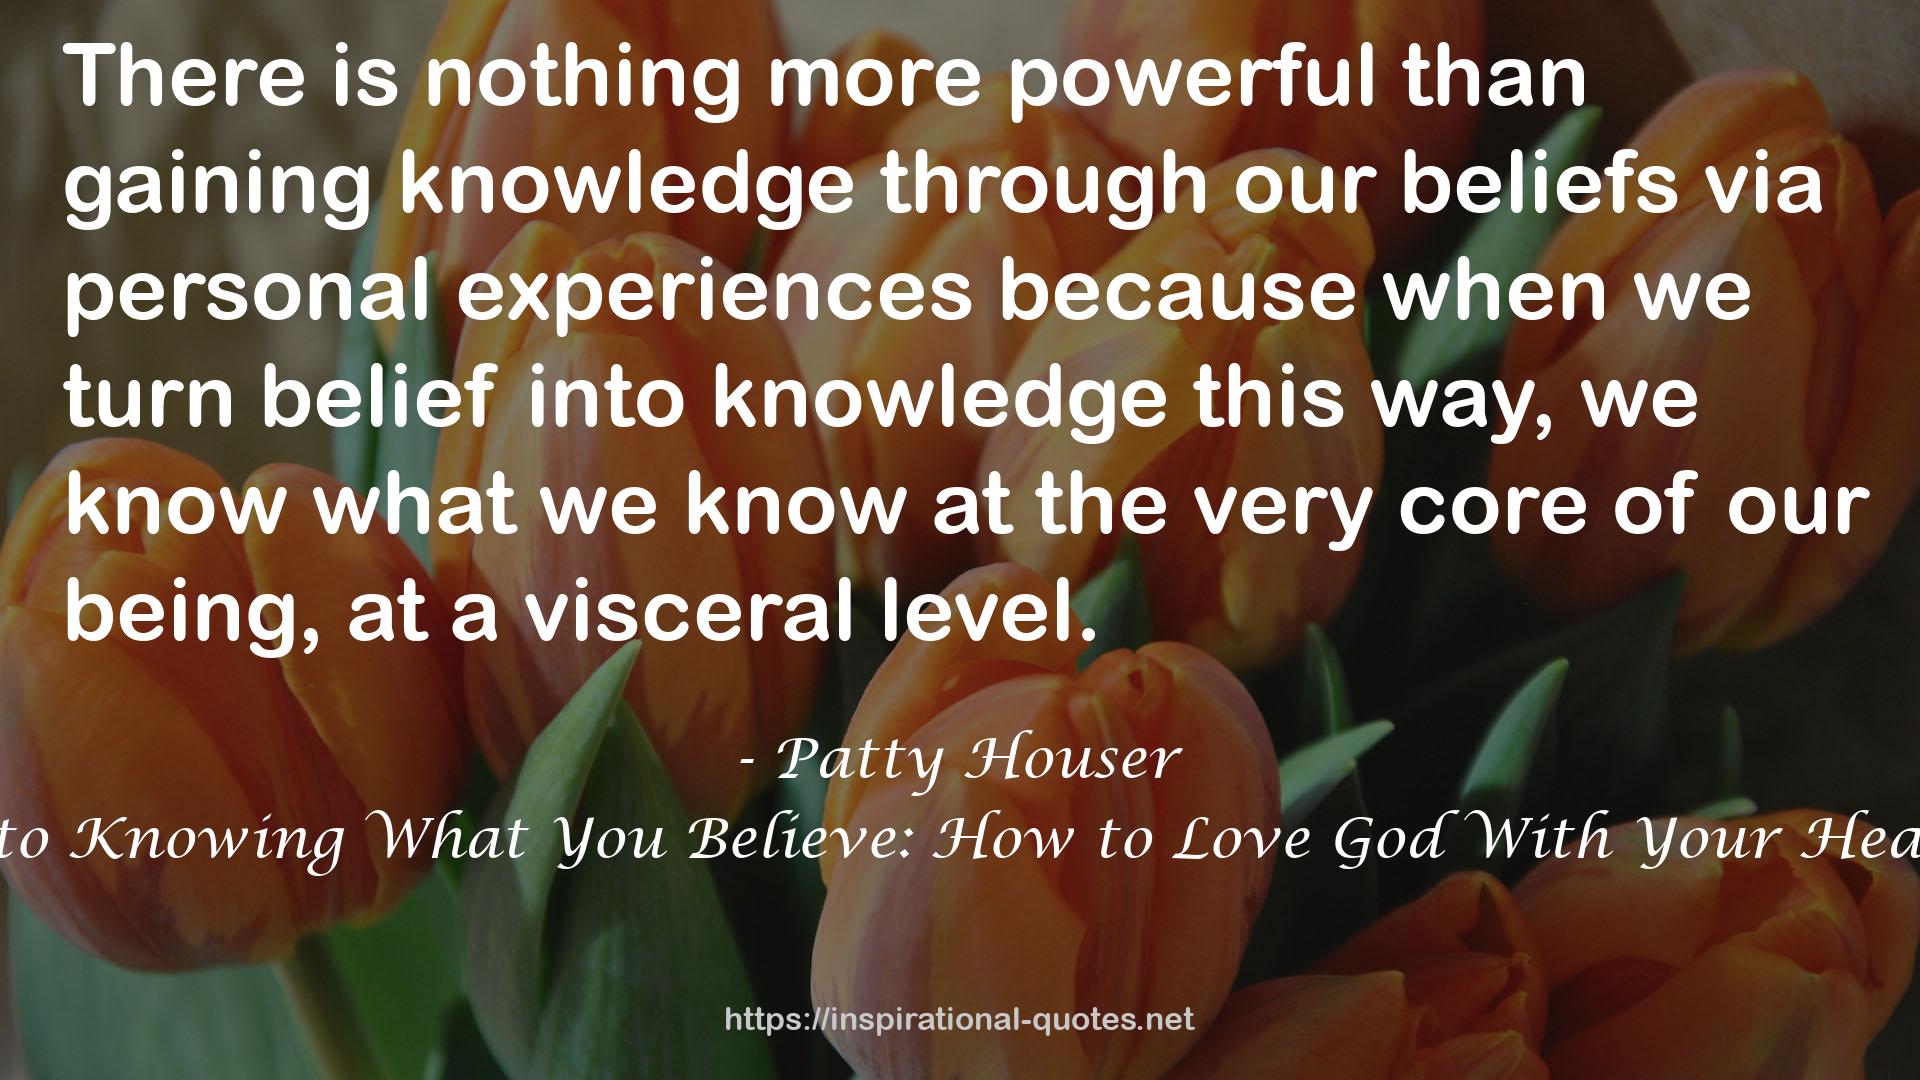 A Woman's Guide to Knowing What You Believe: How to Love God With Your Heart and Your Mind QUOTES